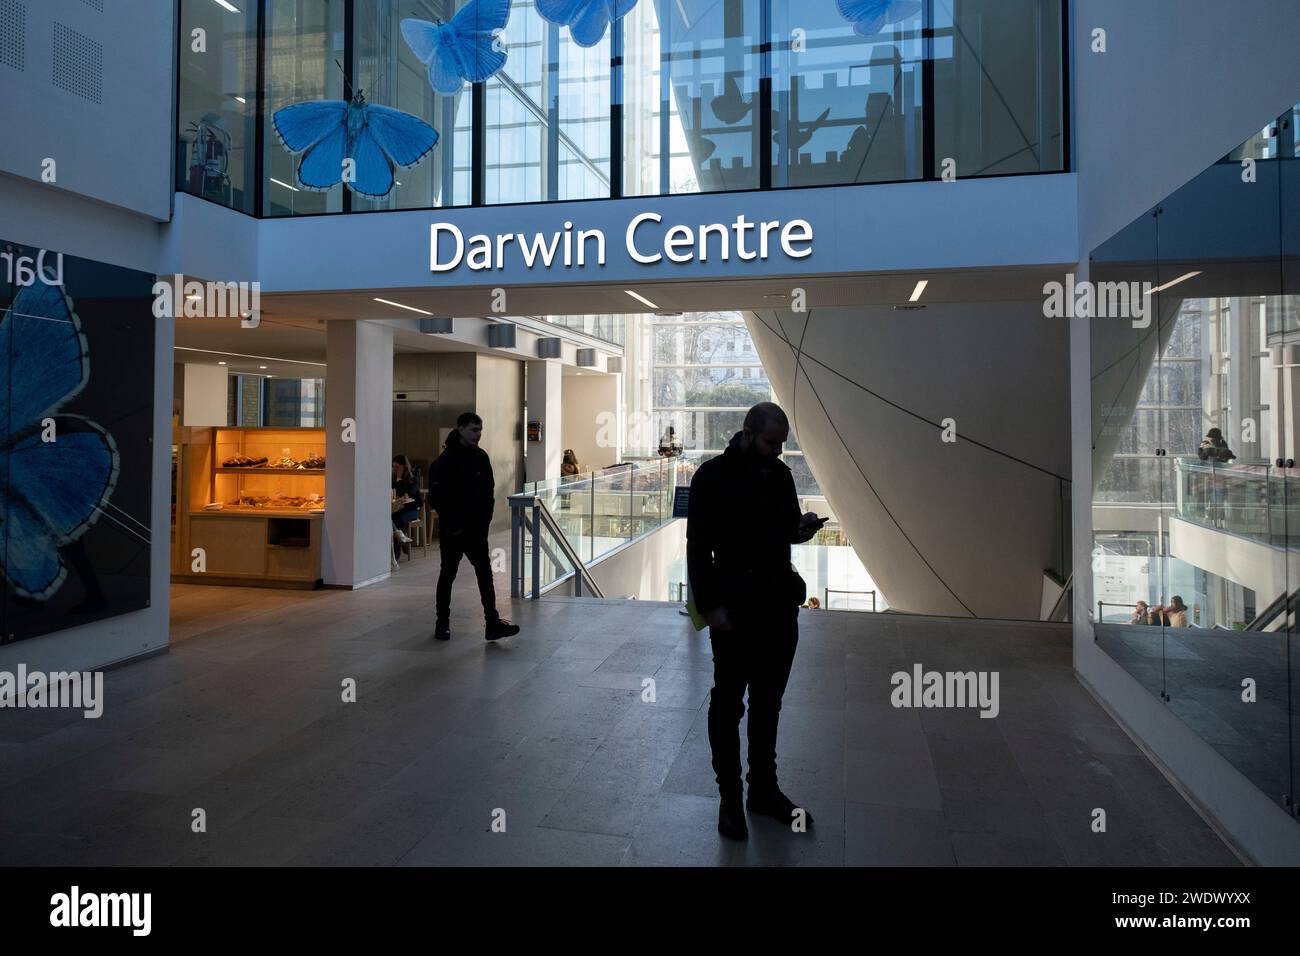 Entrance sign to the Darwin Centre at the Natural History Museum on 19th January 2024 in London, United Kingdom. The Darwin Centre was designed as a new home for the museums collection of tens of millions of preserved specimens, as well as new work spaces for the museums scientific staff and new educational visitor experiences. The museum exhibits a vast range of specimens from various segments of natural history. The museum is home to life and earth science specimens comprising some 80 million items within five main collections: botany, entomology, mineralogy, paleontology and zoology. The mu Stock Photo